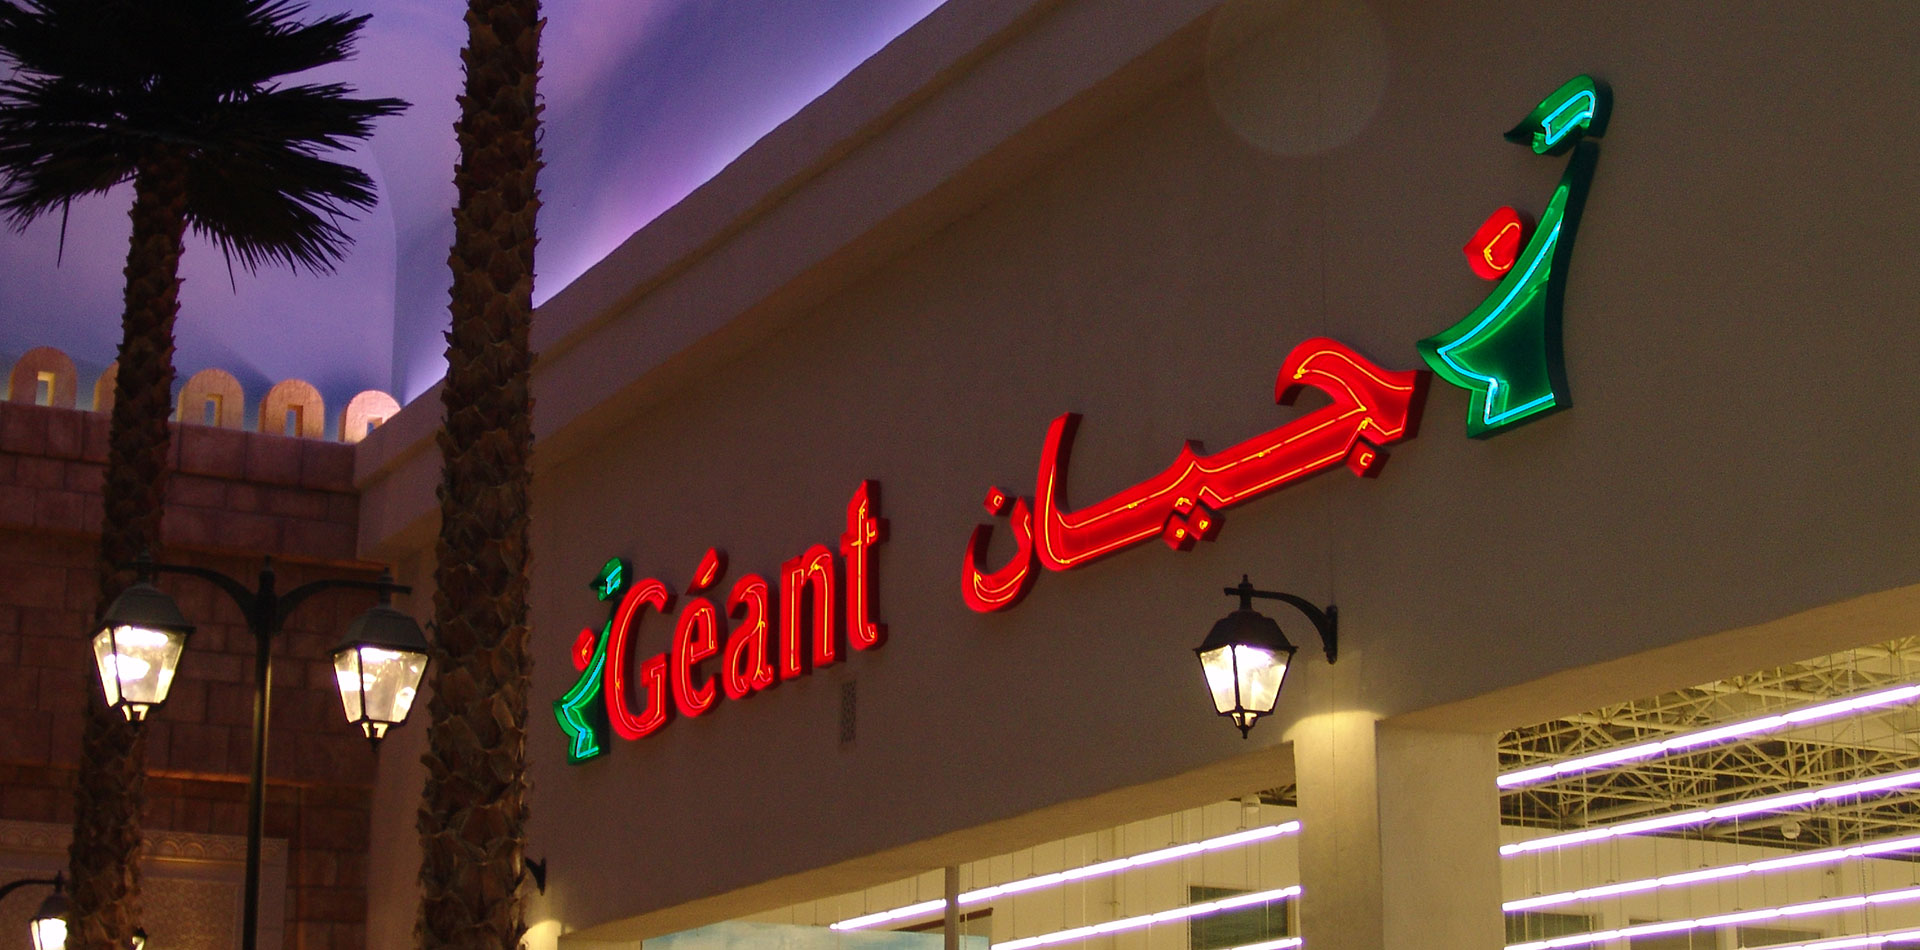 Neon Signage of Geant